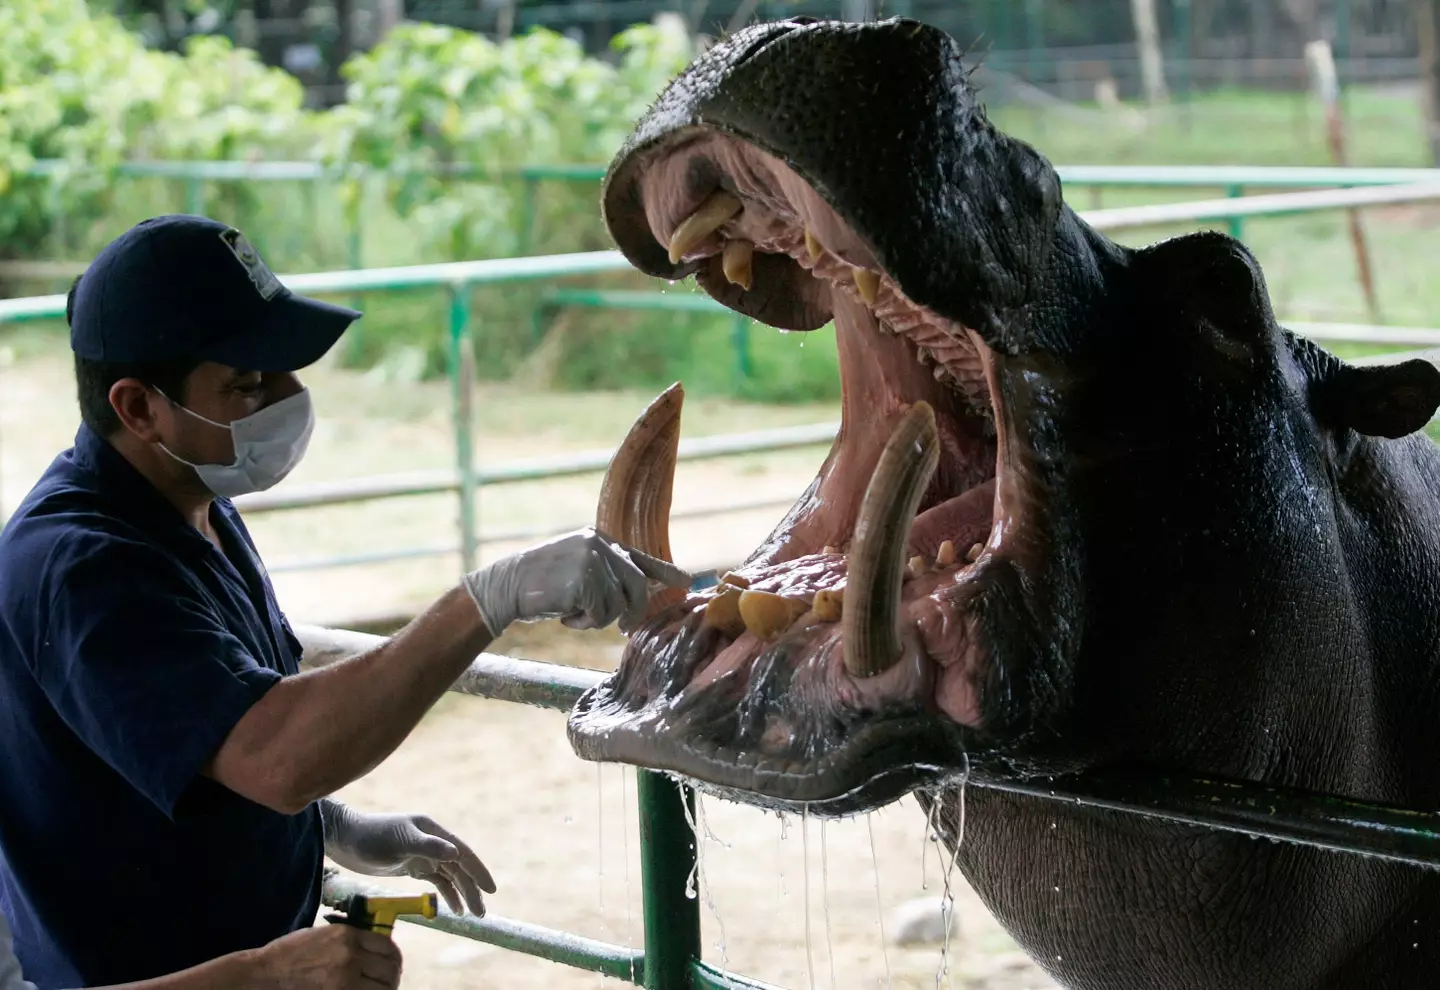 A hippopotamus called Orion who was born at the Hacienda Napoles ranch being treated at the Zoo Santa Fe in Medellin in 2010.